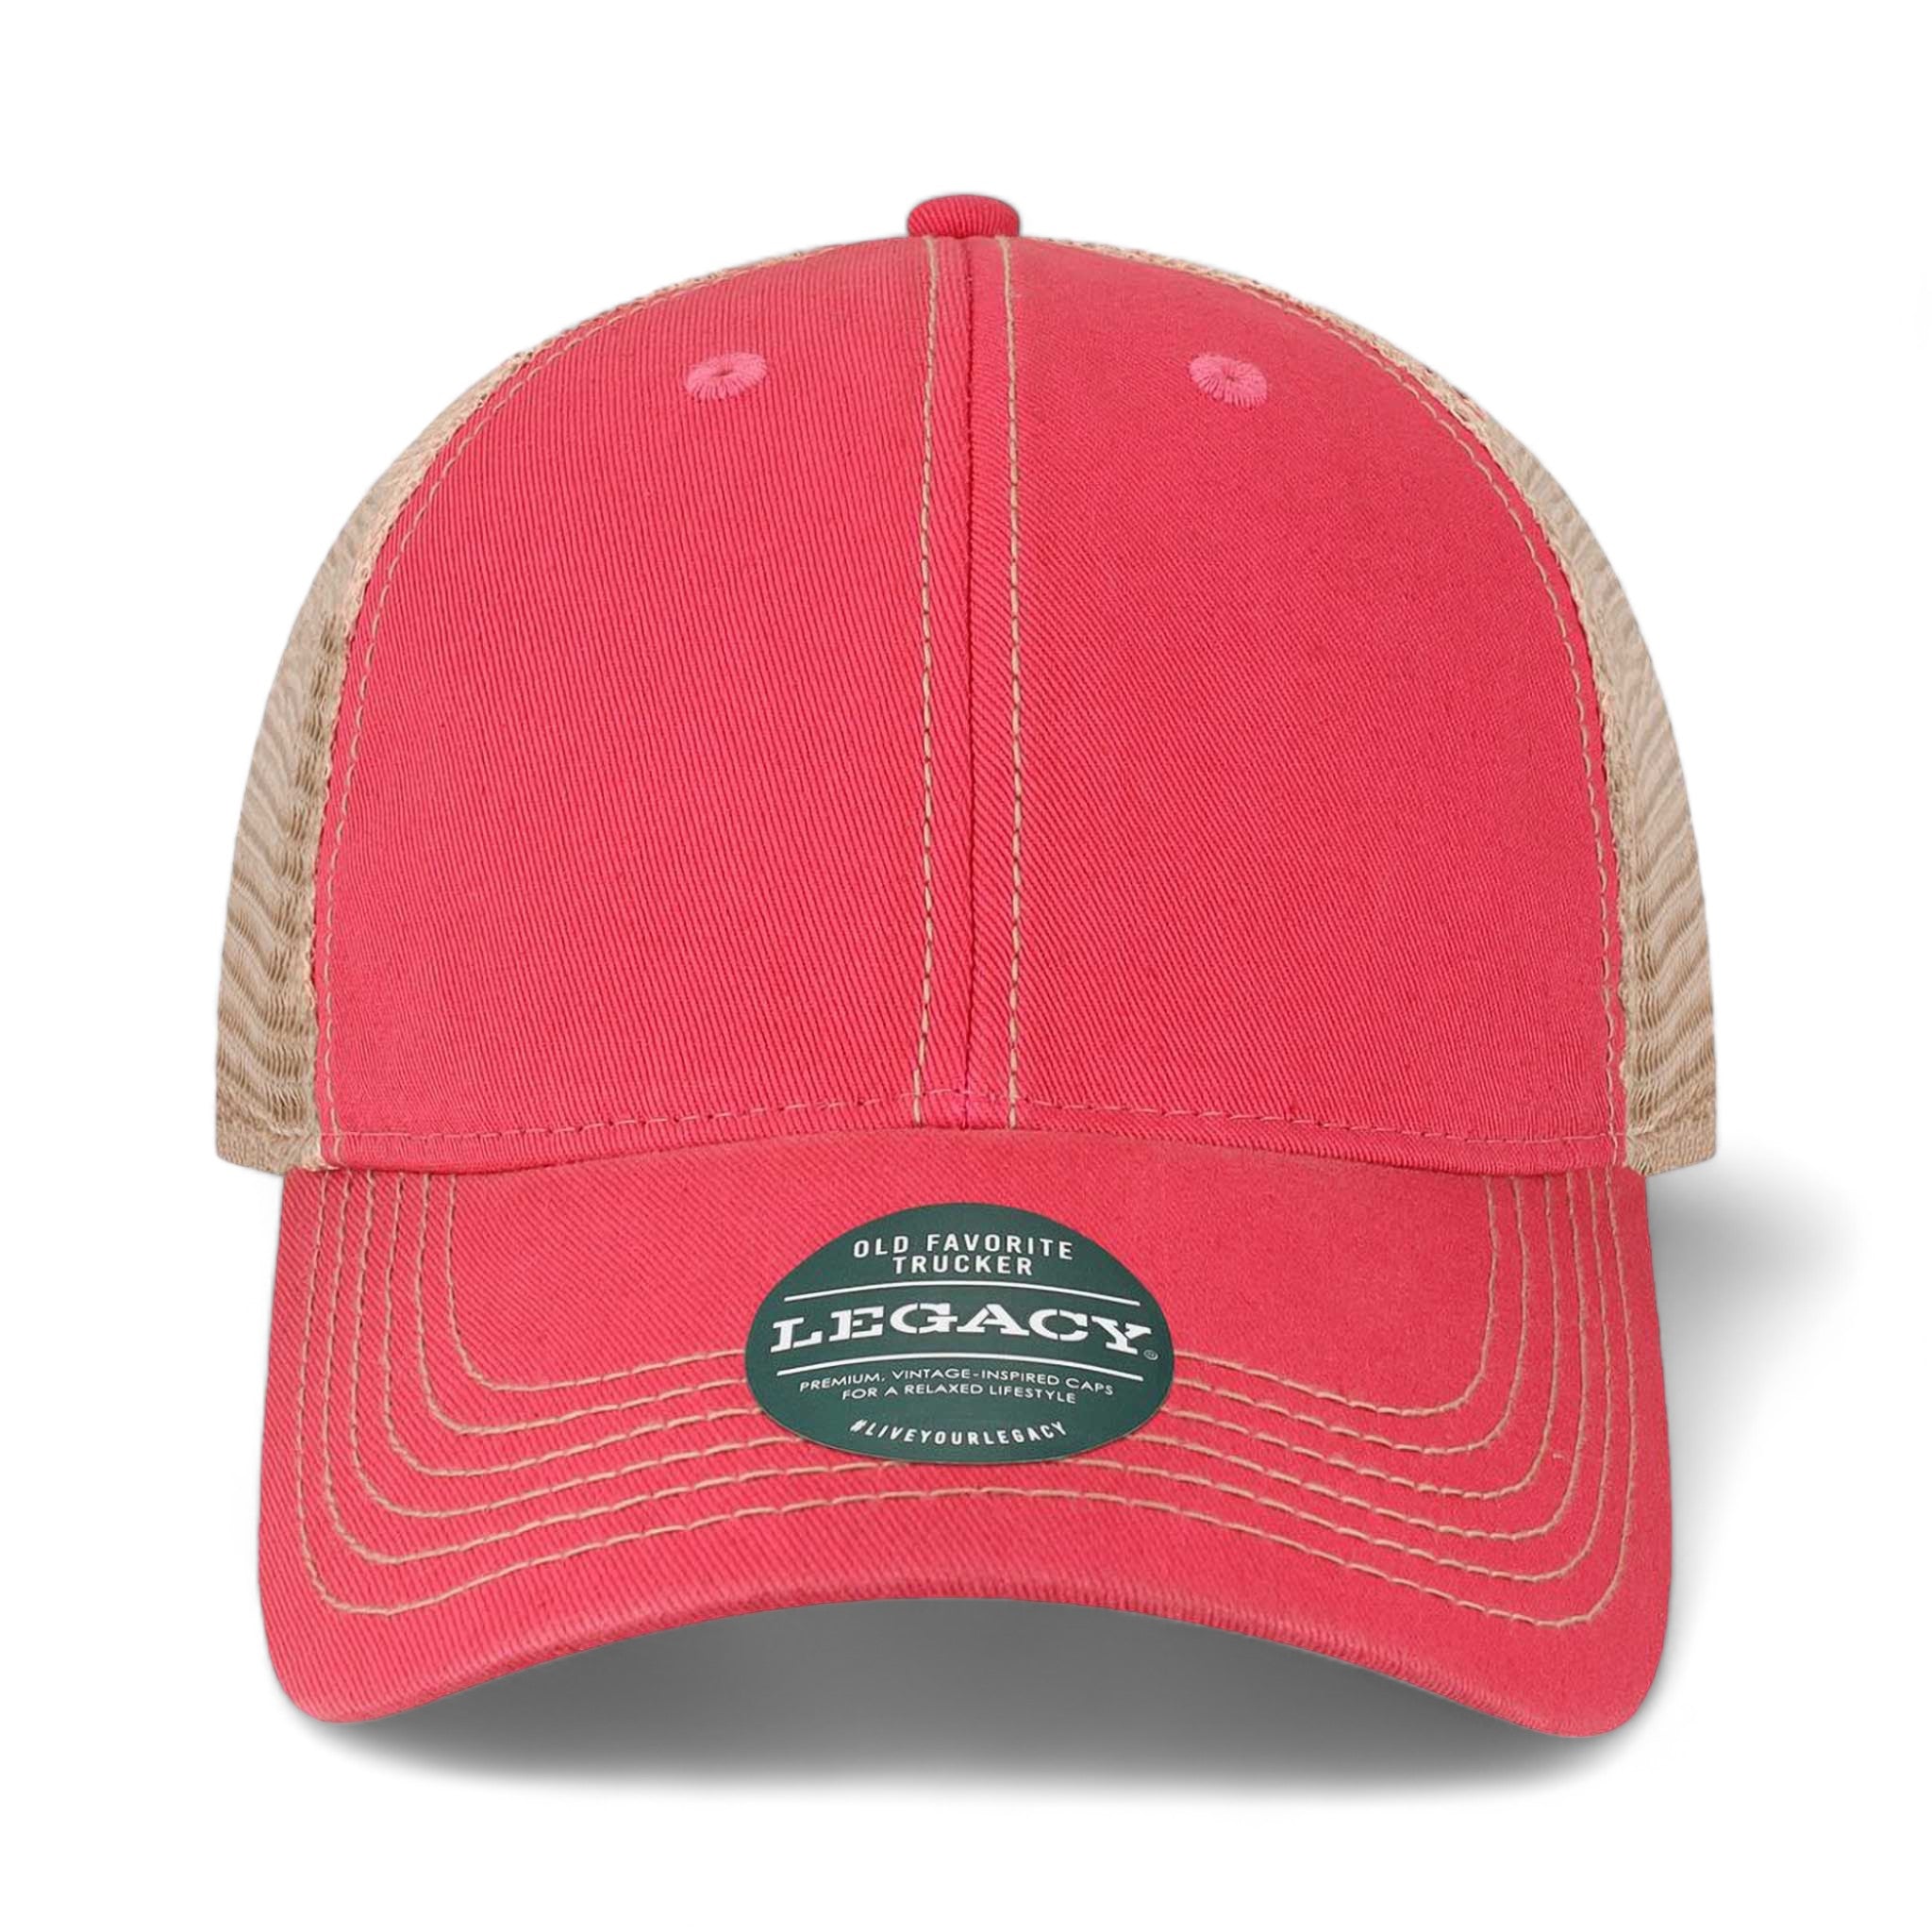 Front view of LEGACY OFAY custom hat in dark pink and khaki